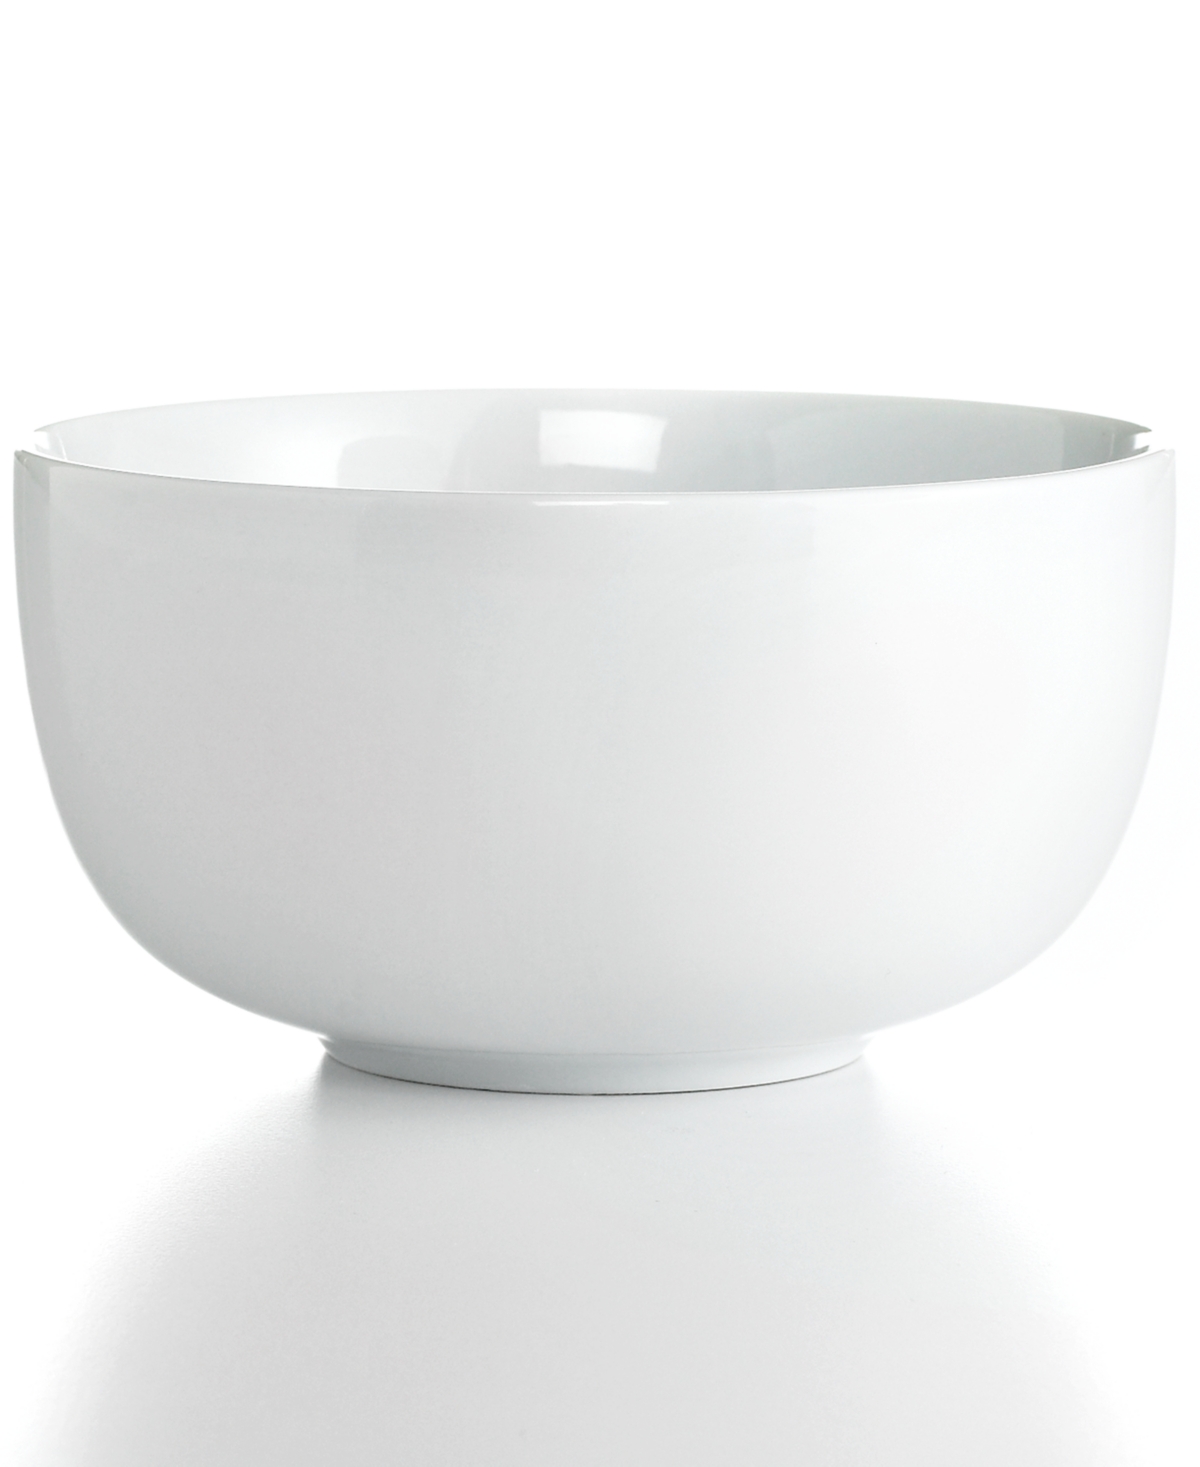 The Cellar Whiteware Cereal Bowl, Created for Macy's